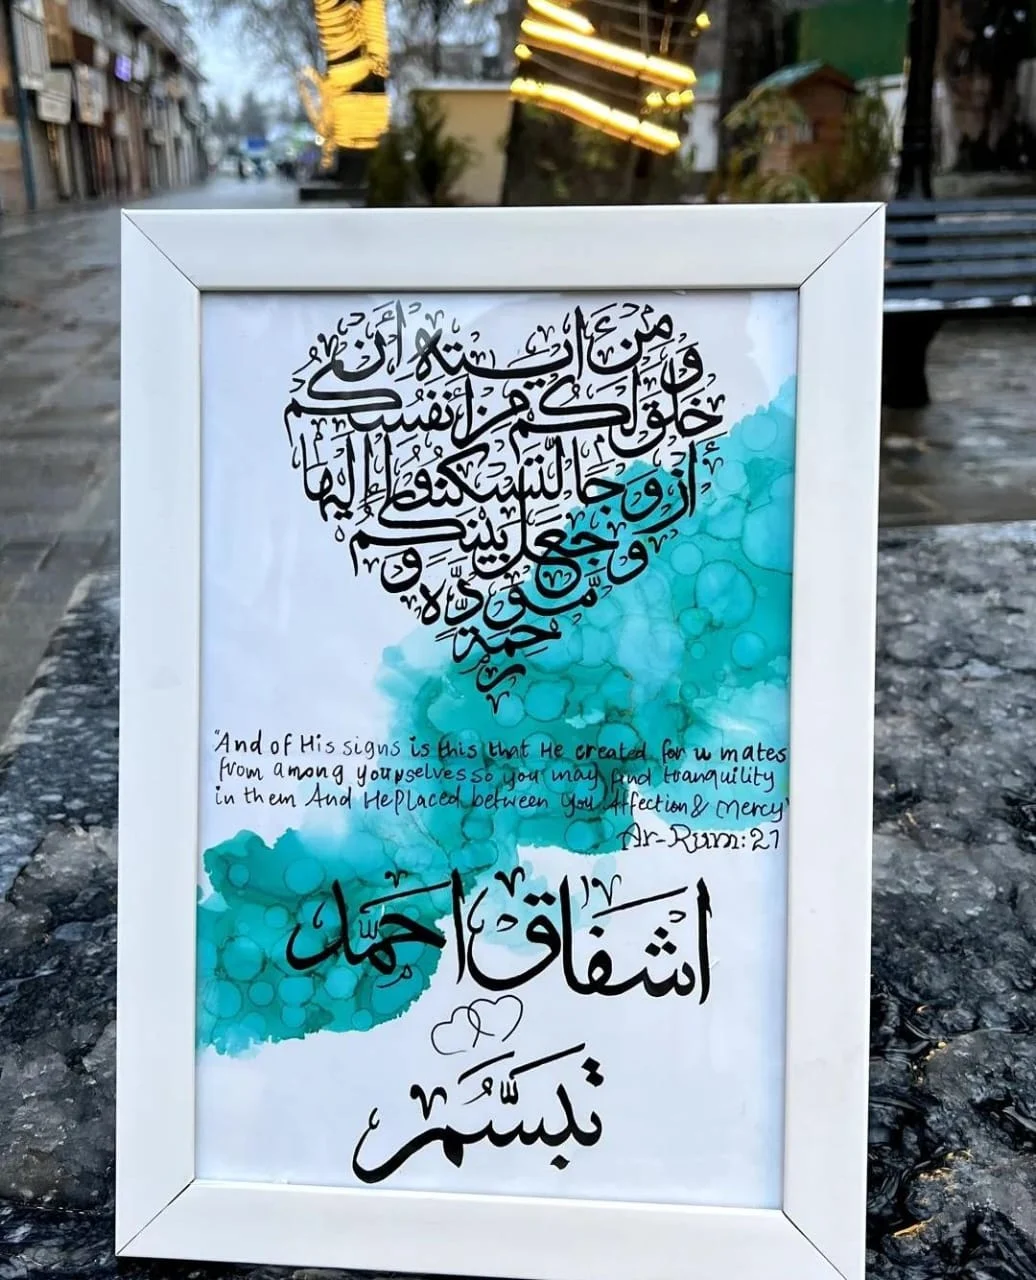 Calligrapher Muskan Afreen Finds Divine Inspiration in Islamic Tradition